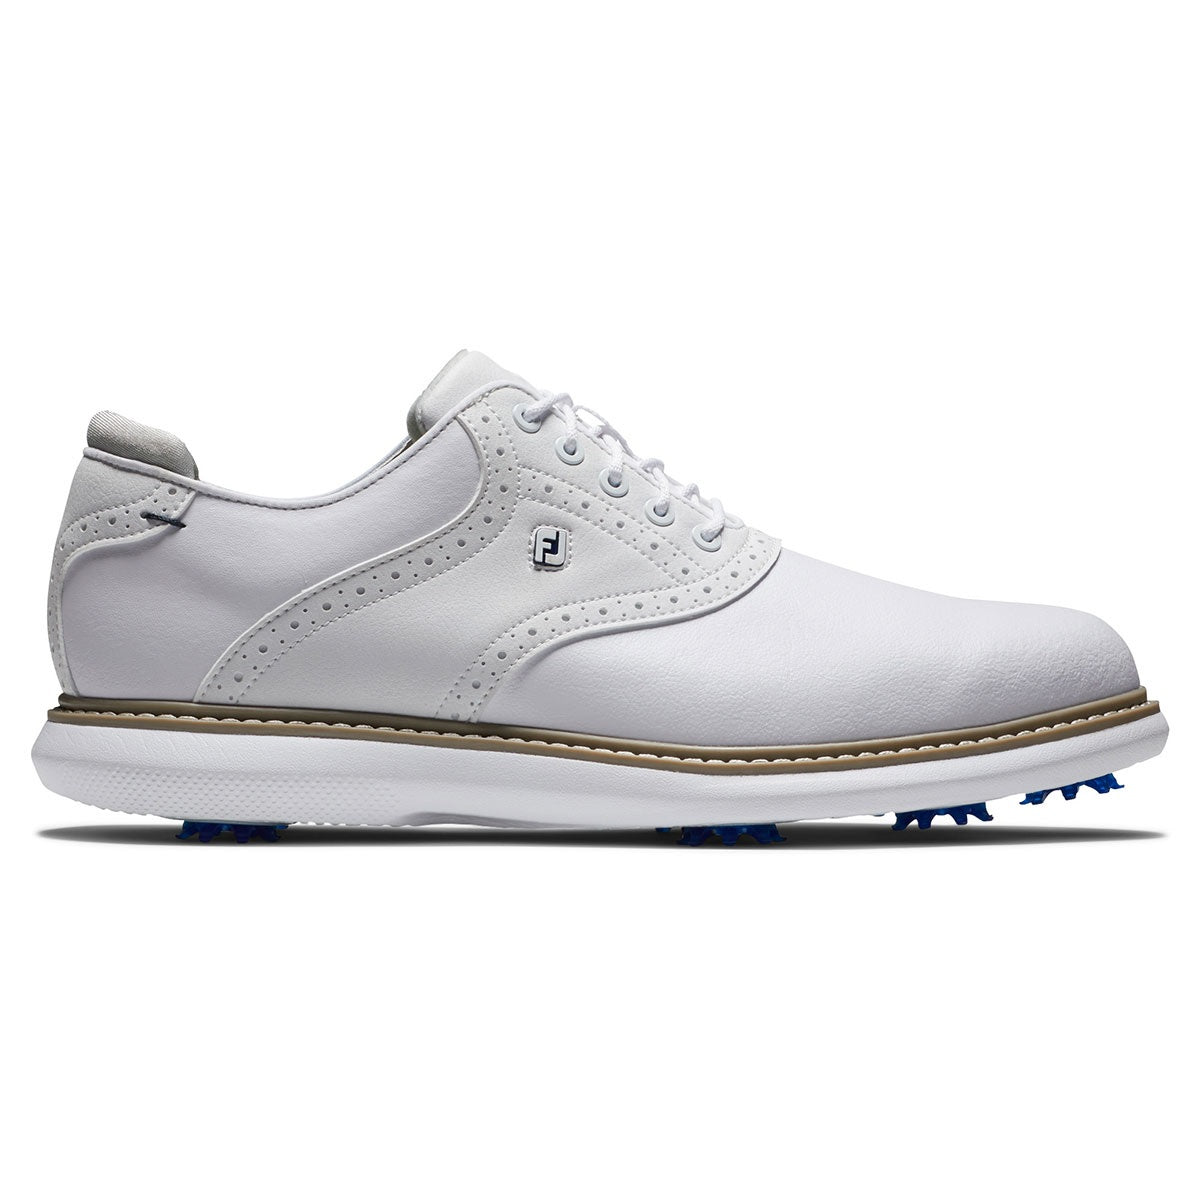 FOOTJOY - TRADITION Homme Blanche